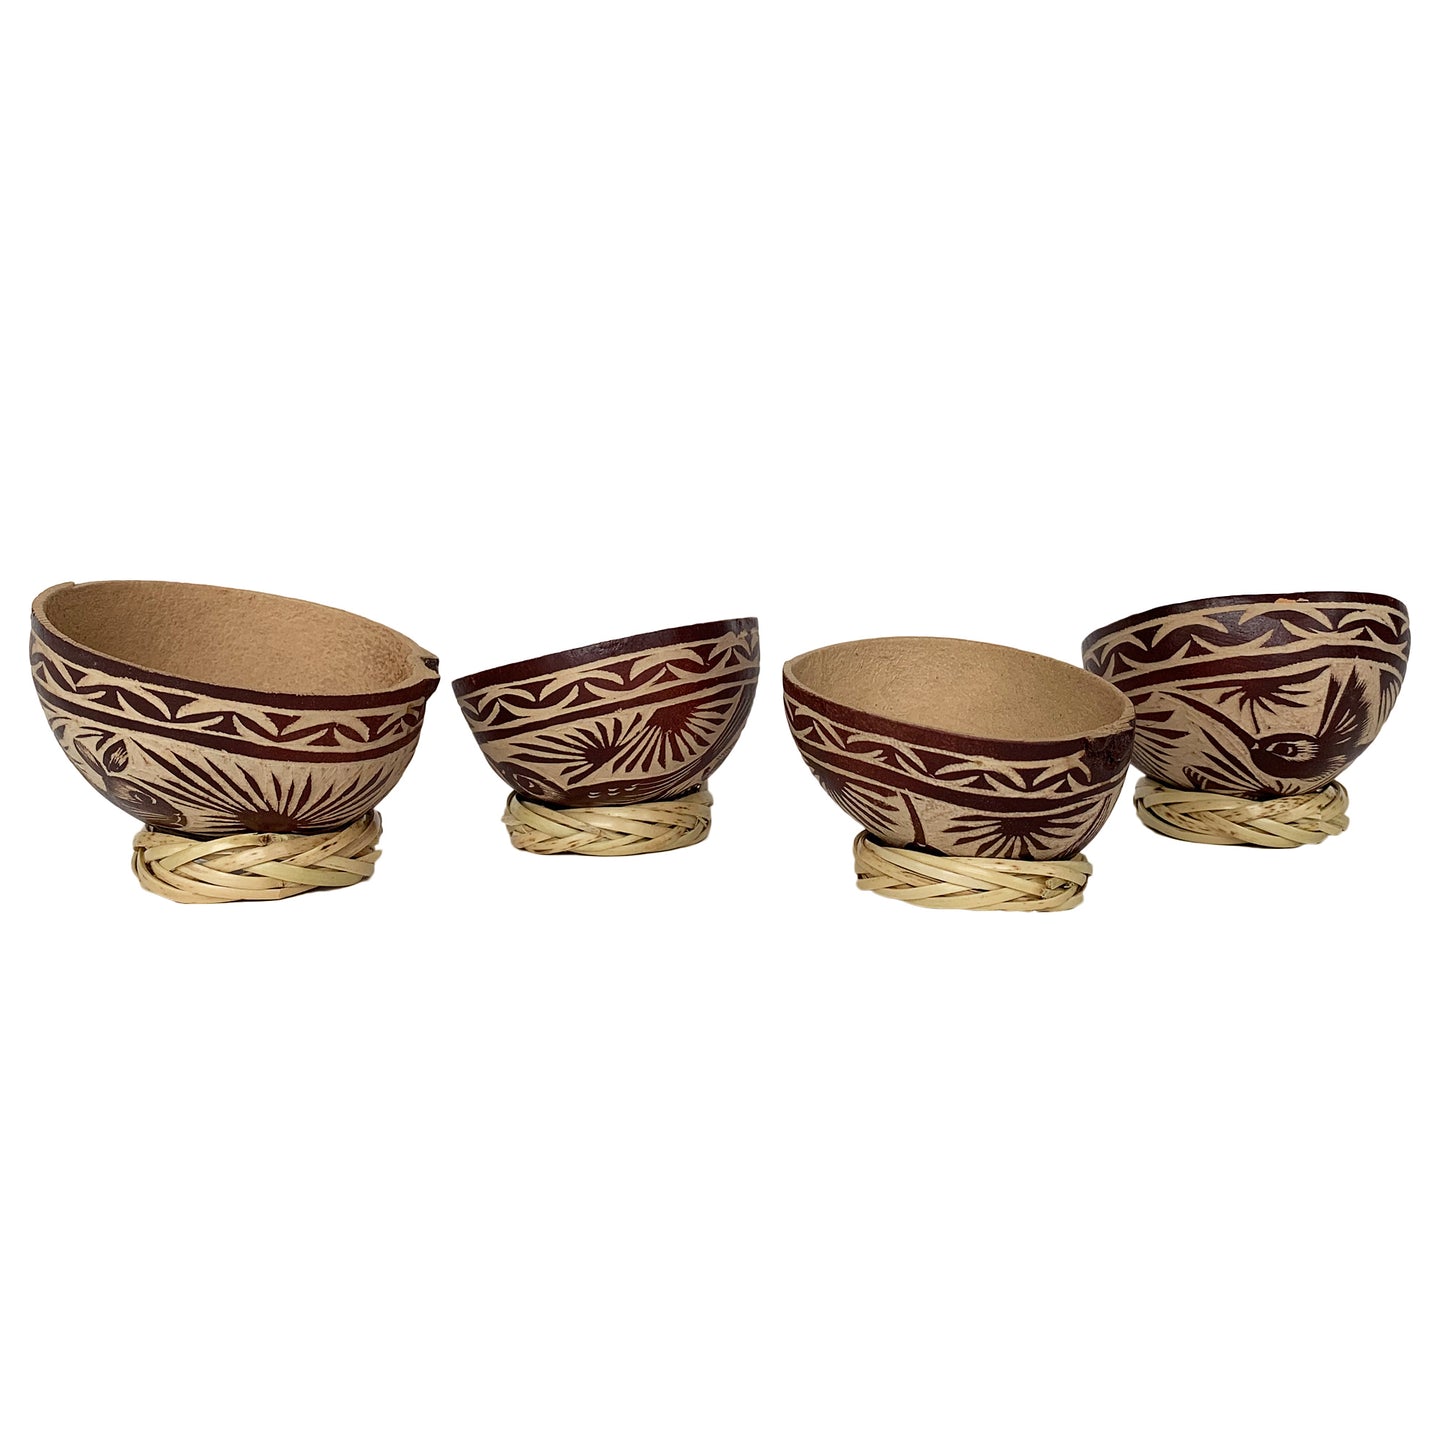 Mezcal Jicaras (Small, Shot Glass Size) - Holds 2-3 Ounces - Hand-carved from Mexico with Natural Fiber Base